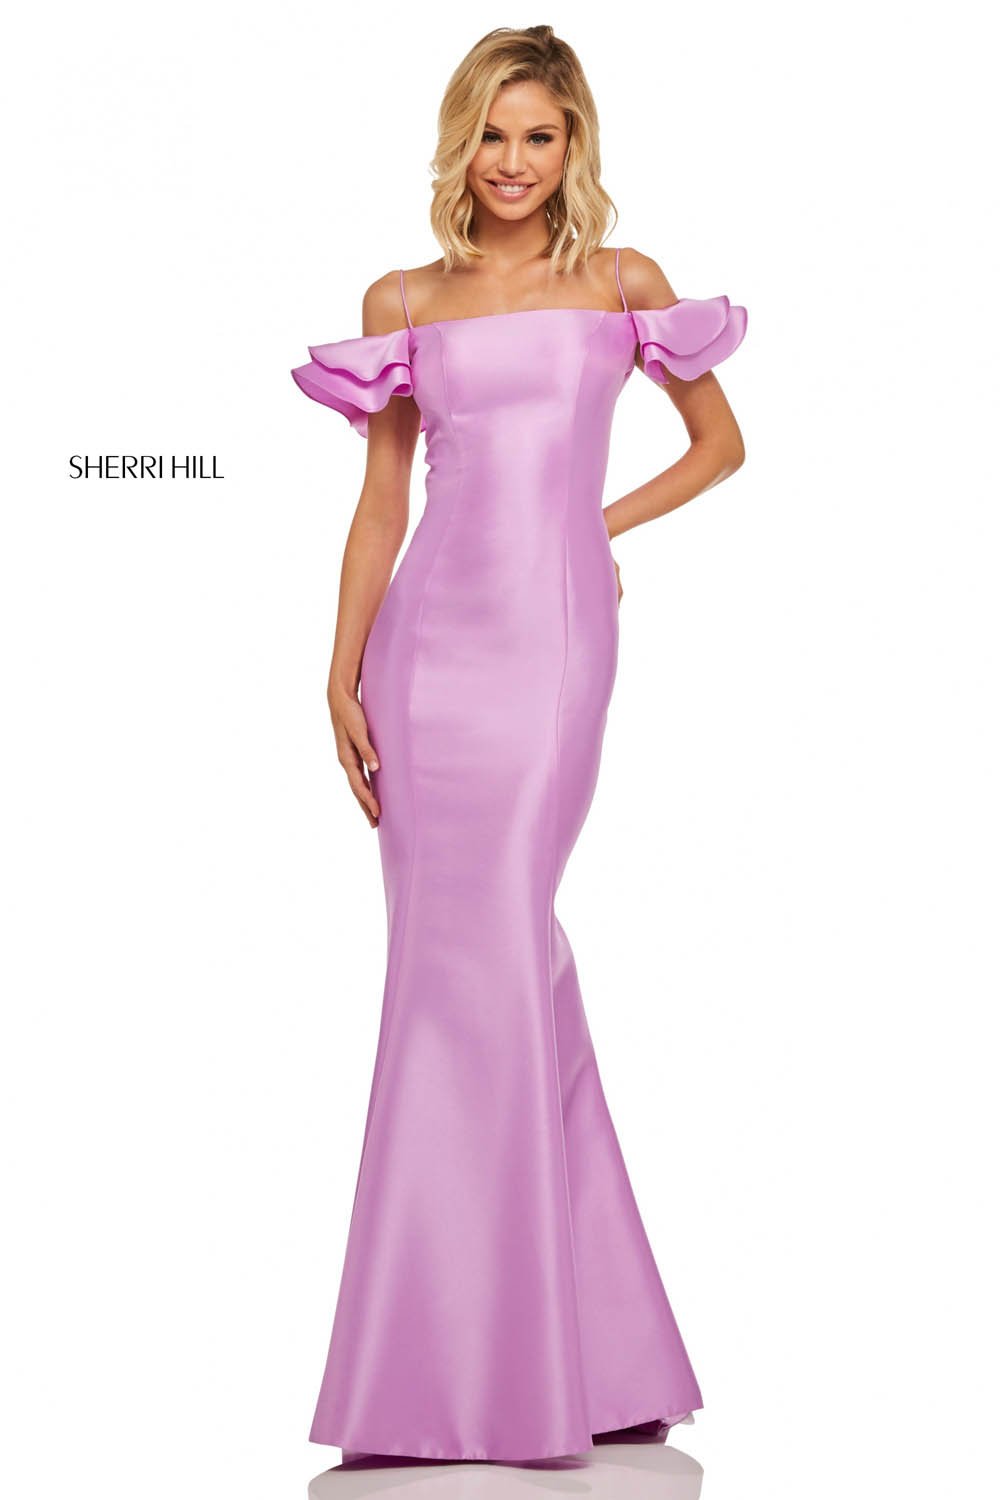 Sherri Hill 52467 dress images in these colors: Lilac, Light Blue, Yellow, Fuchsia, Black, Navy, Red.